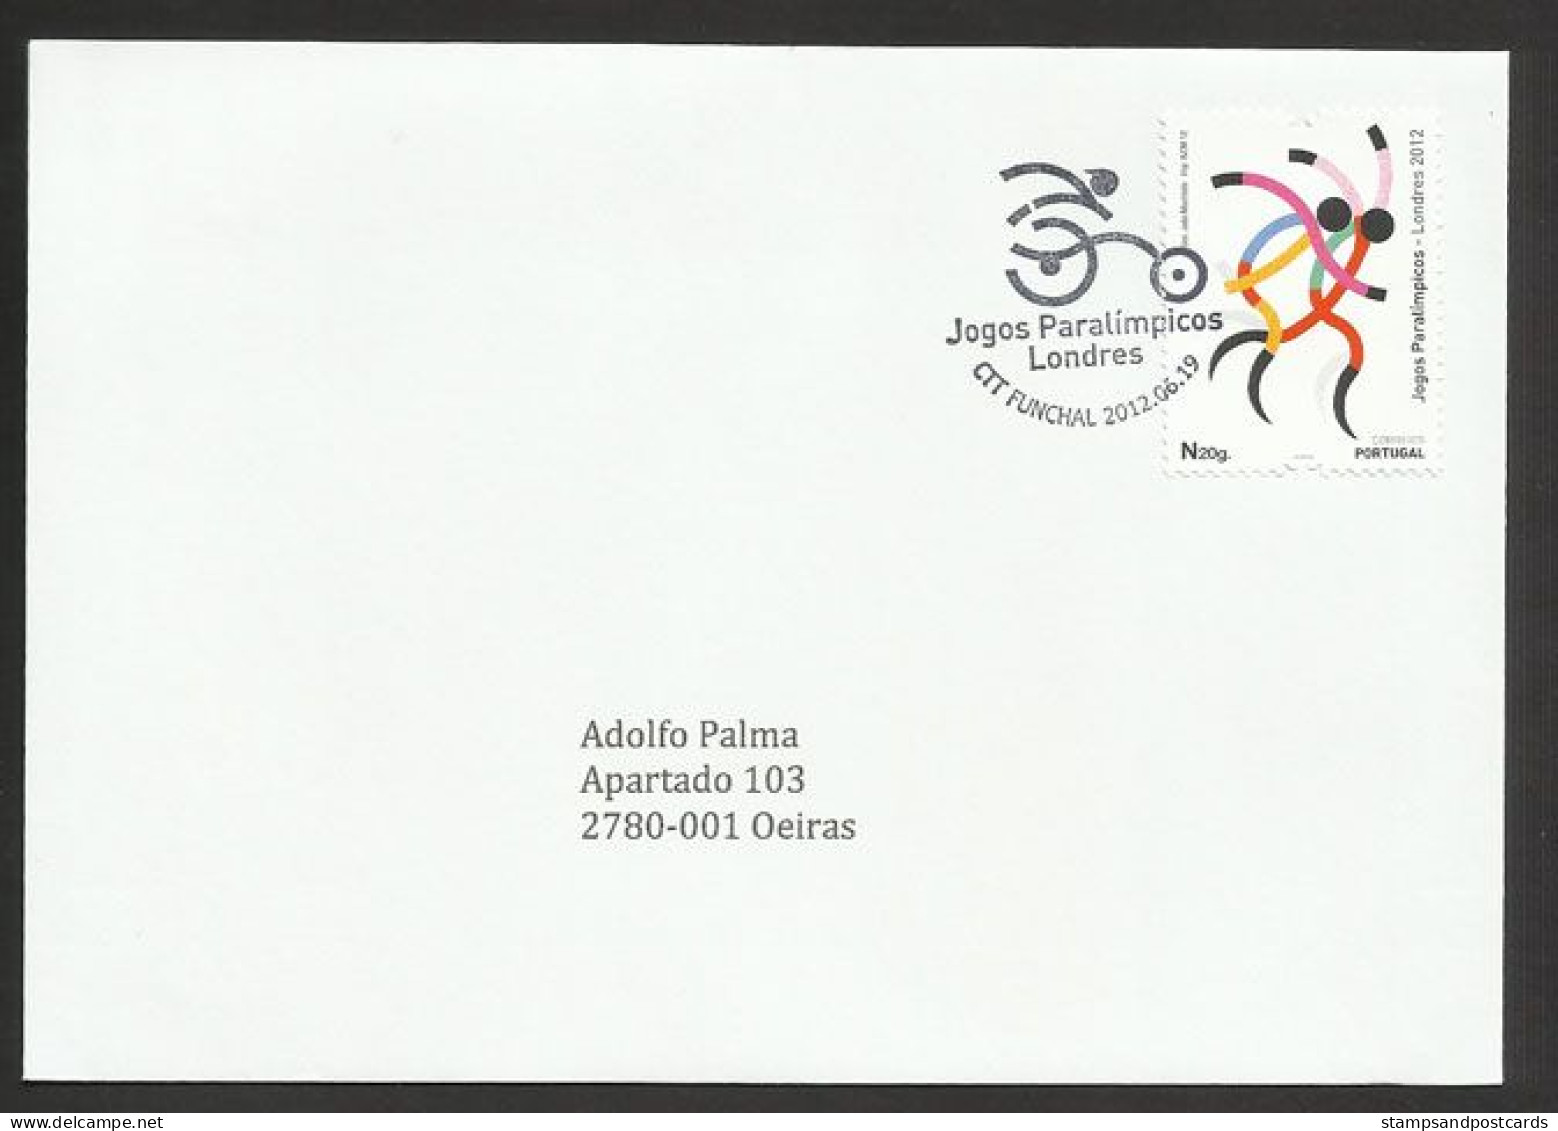 Portugal Jeux Paralympiques London 2012 FDC Cachet Madère Paralympic Games FDC Madeira Postmark - Sommer 2012: London